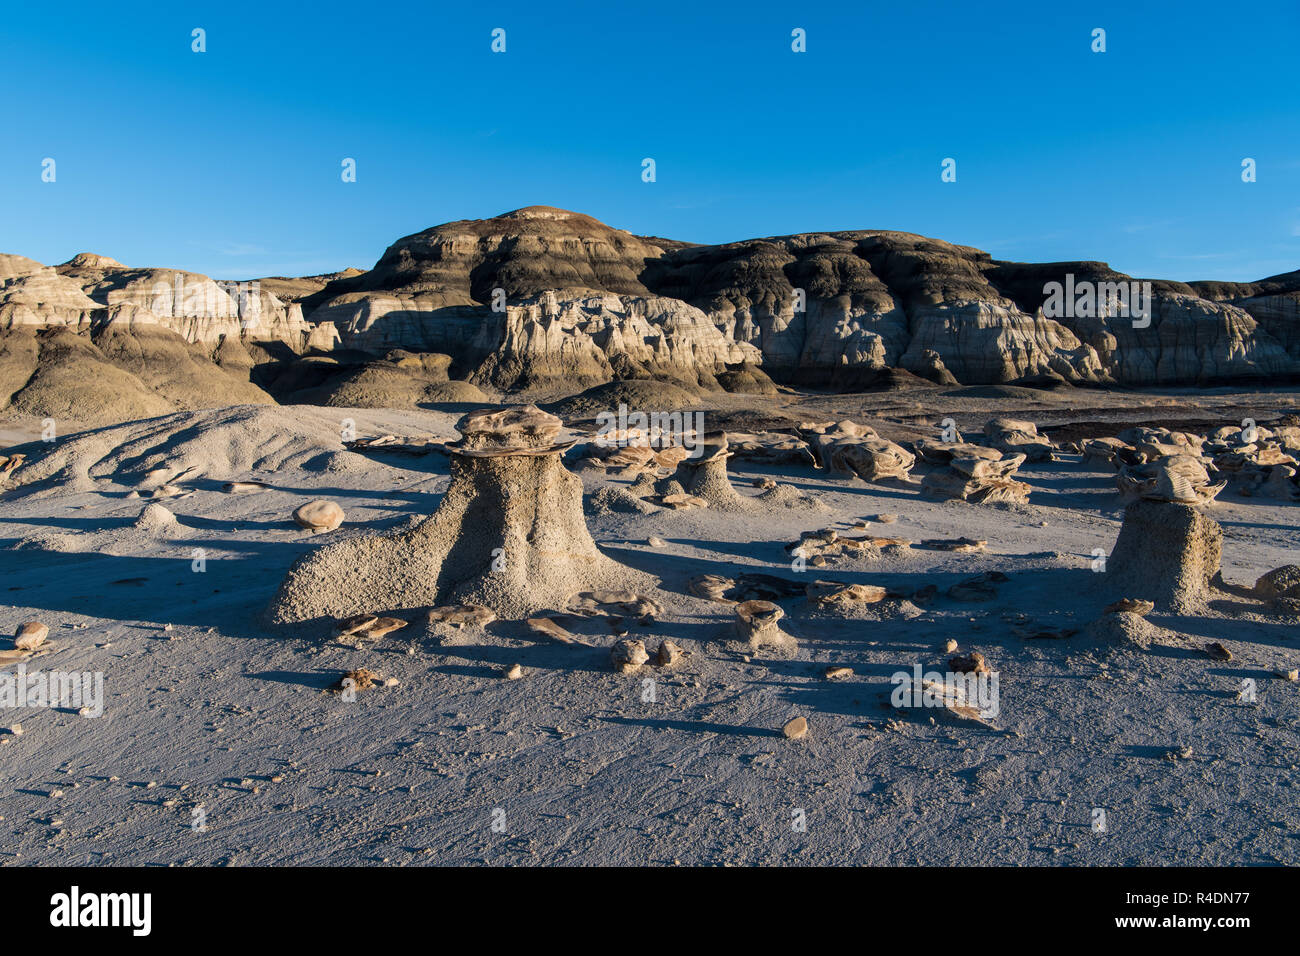 Unusual rock formations in the "Cracked Eggs" rock field in the Bisti Badlands of New Mexico Stock Photo